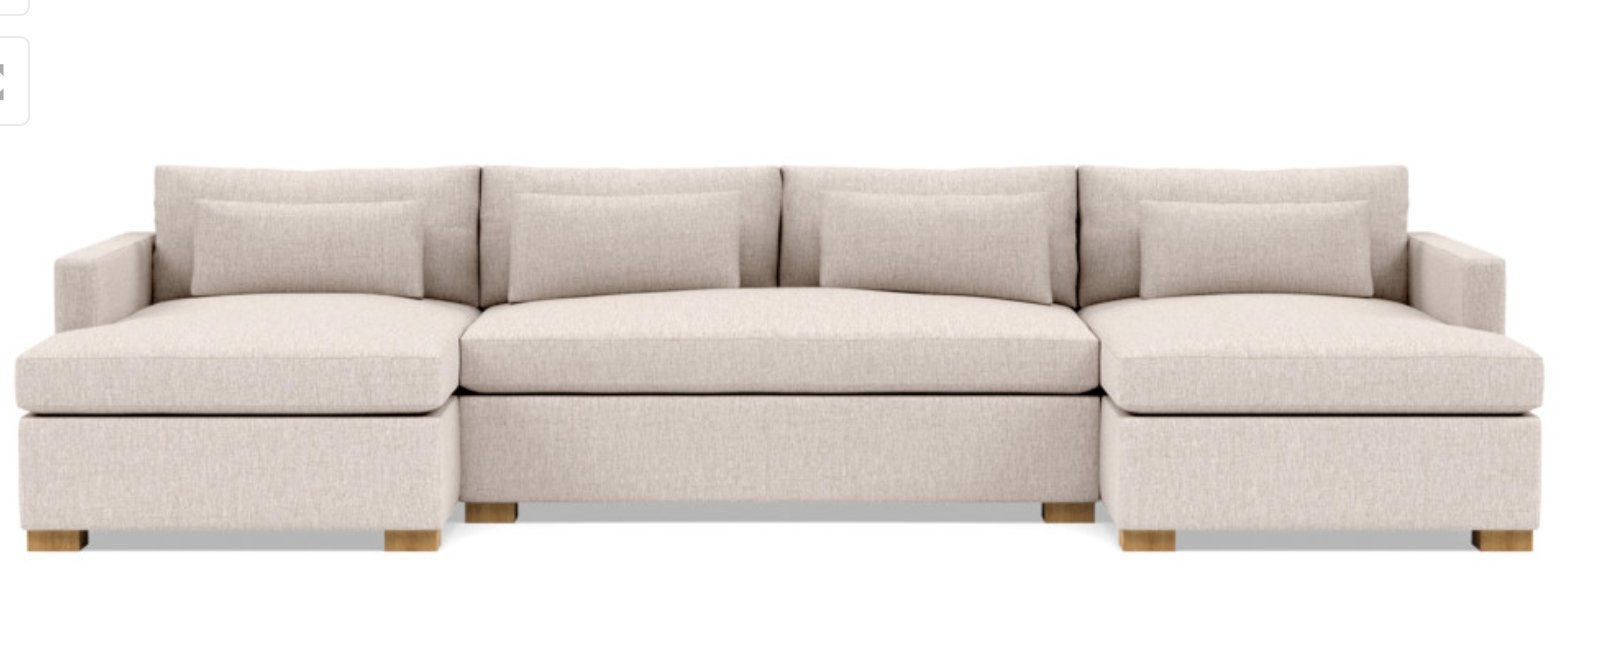 Charly U-Sectional with Beige Wheat Fabric, double down cushions, extended right chaise, extended left chaise, and Natural Oak legs - Image 0